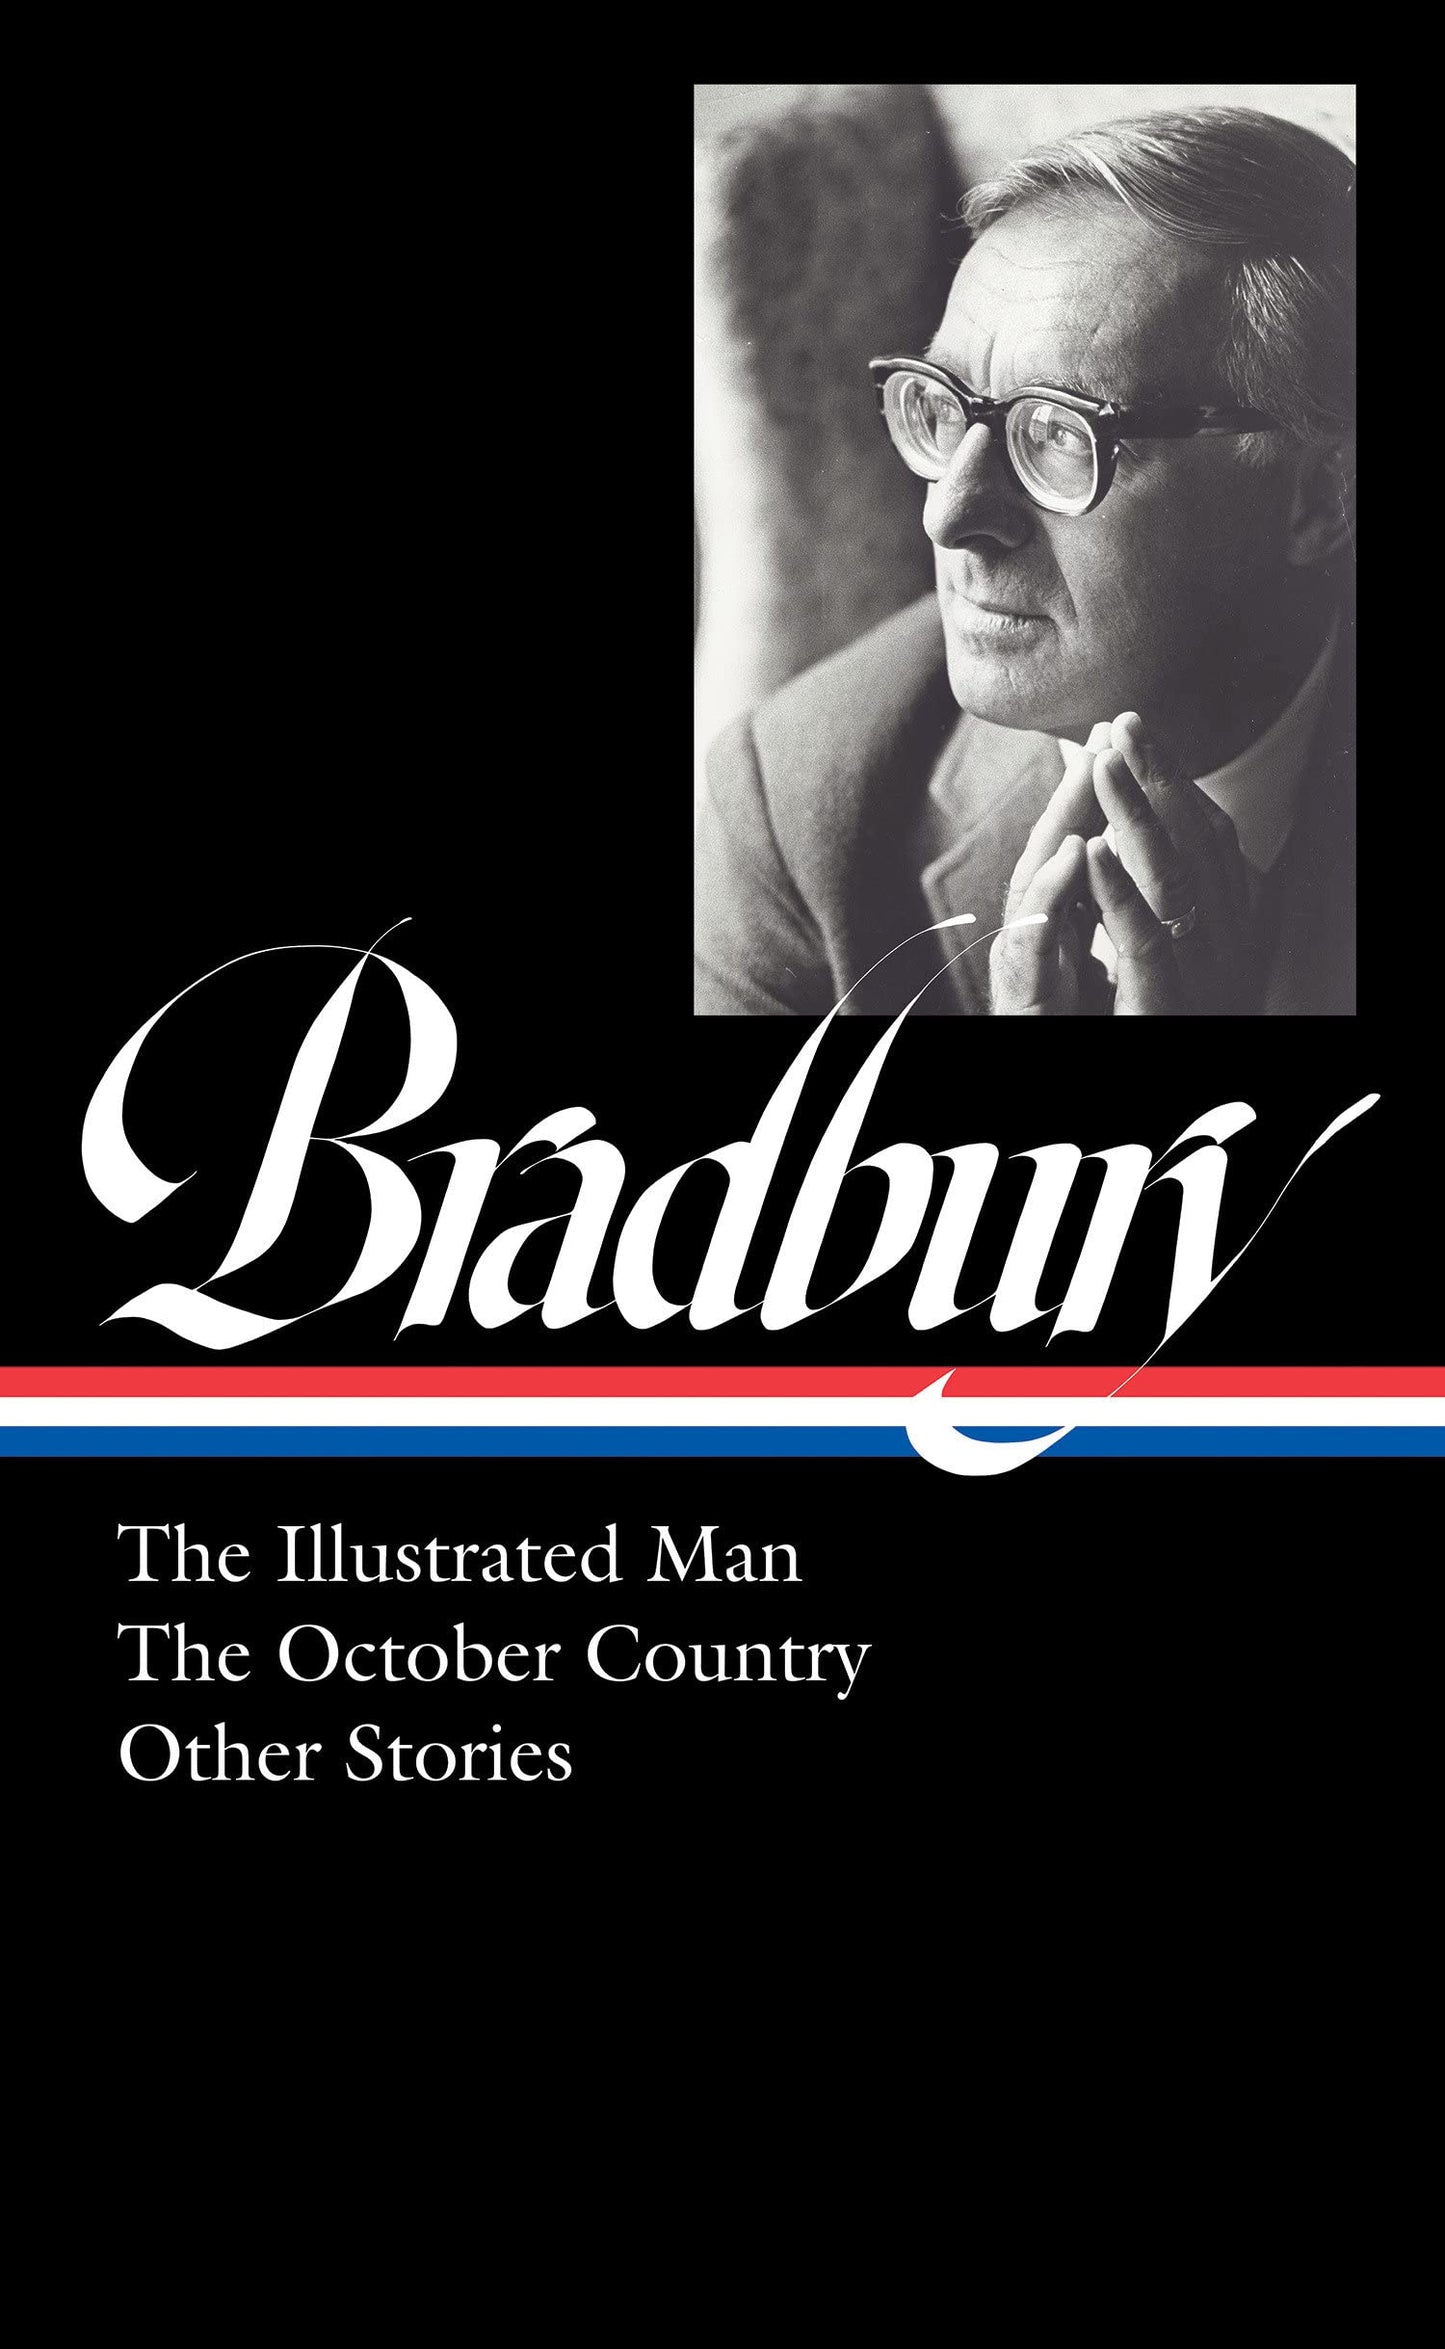 Ray Bradbury, Library of America hardcover: Illustrated Man, October Country & Other Stories (LOA #360)